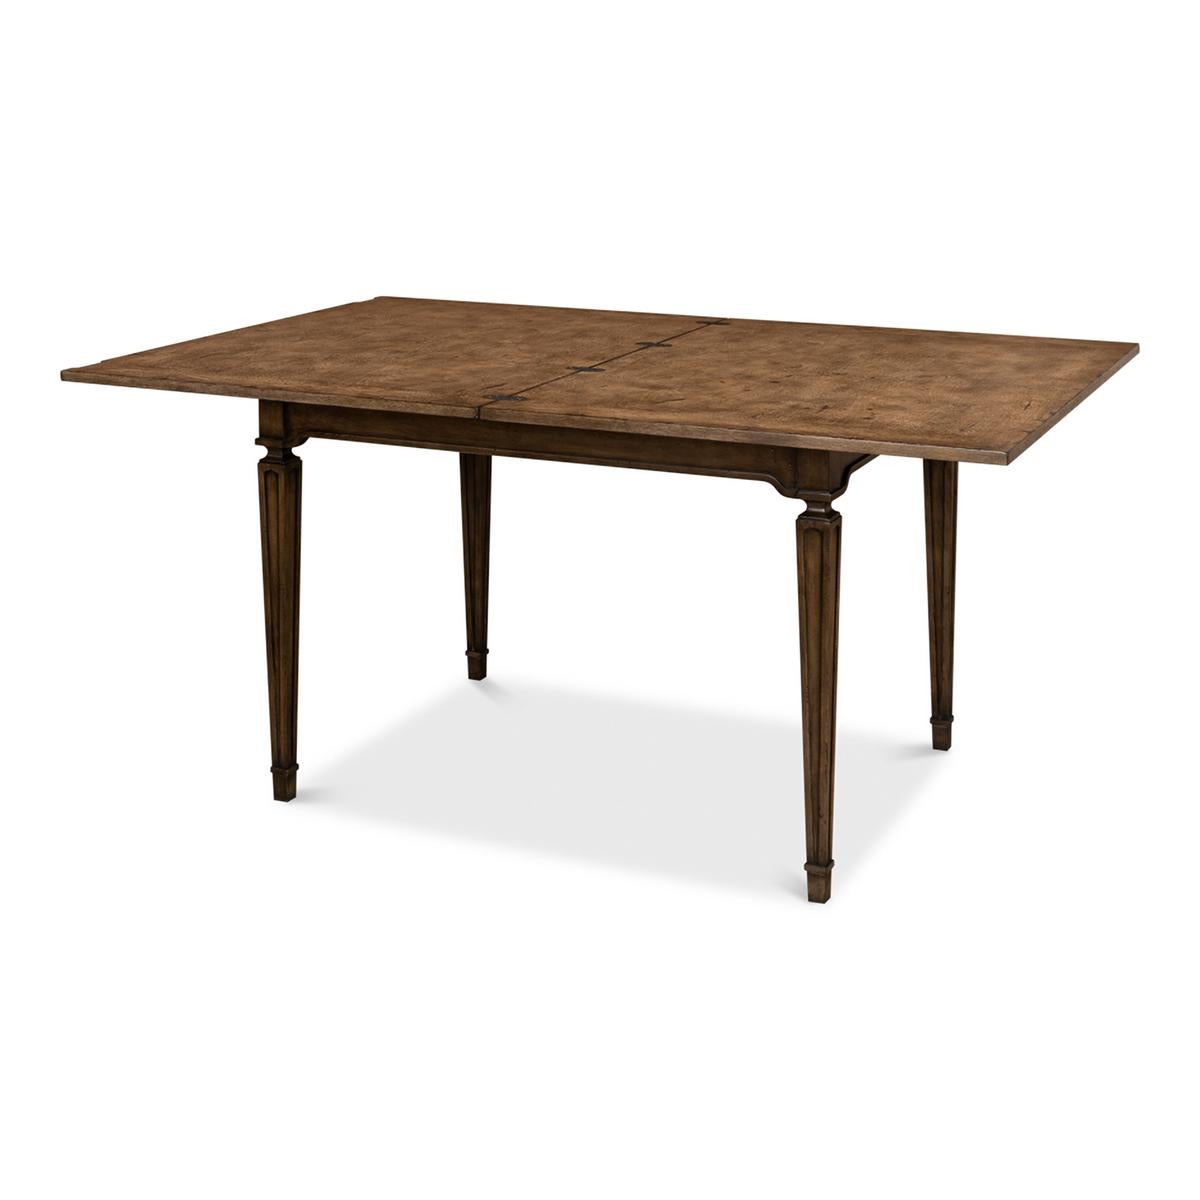 An Italian Neo-Classic style walnut game table or dining room table. This unique table folds open and extends from 42